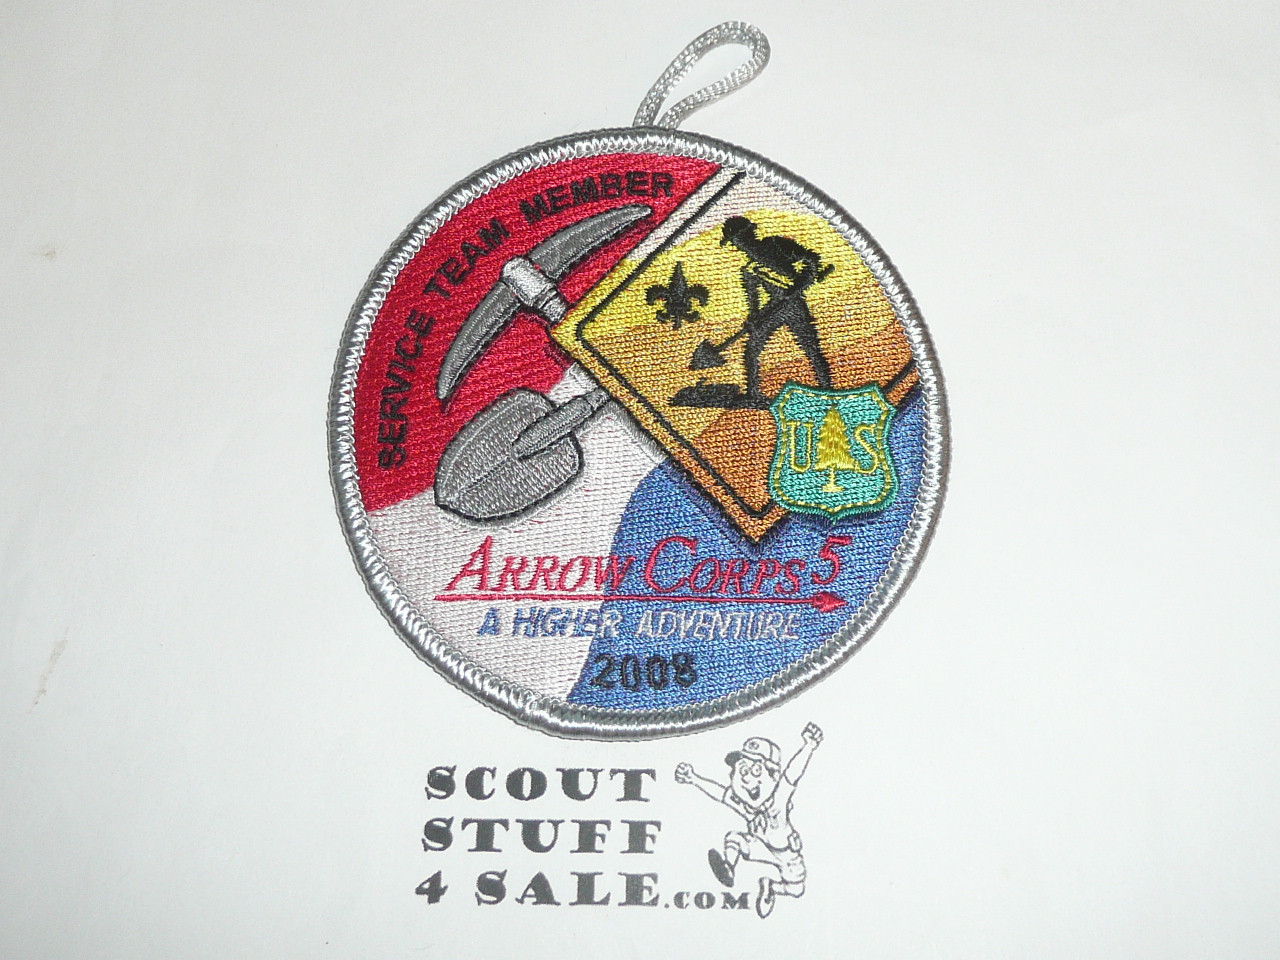 2008 Order of the Arrow Arrow Corps Service Team Patch